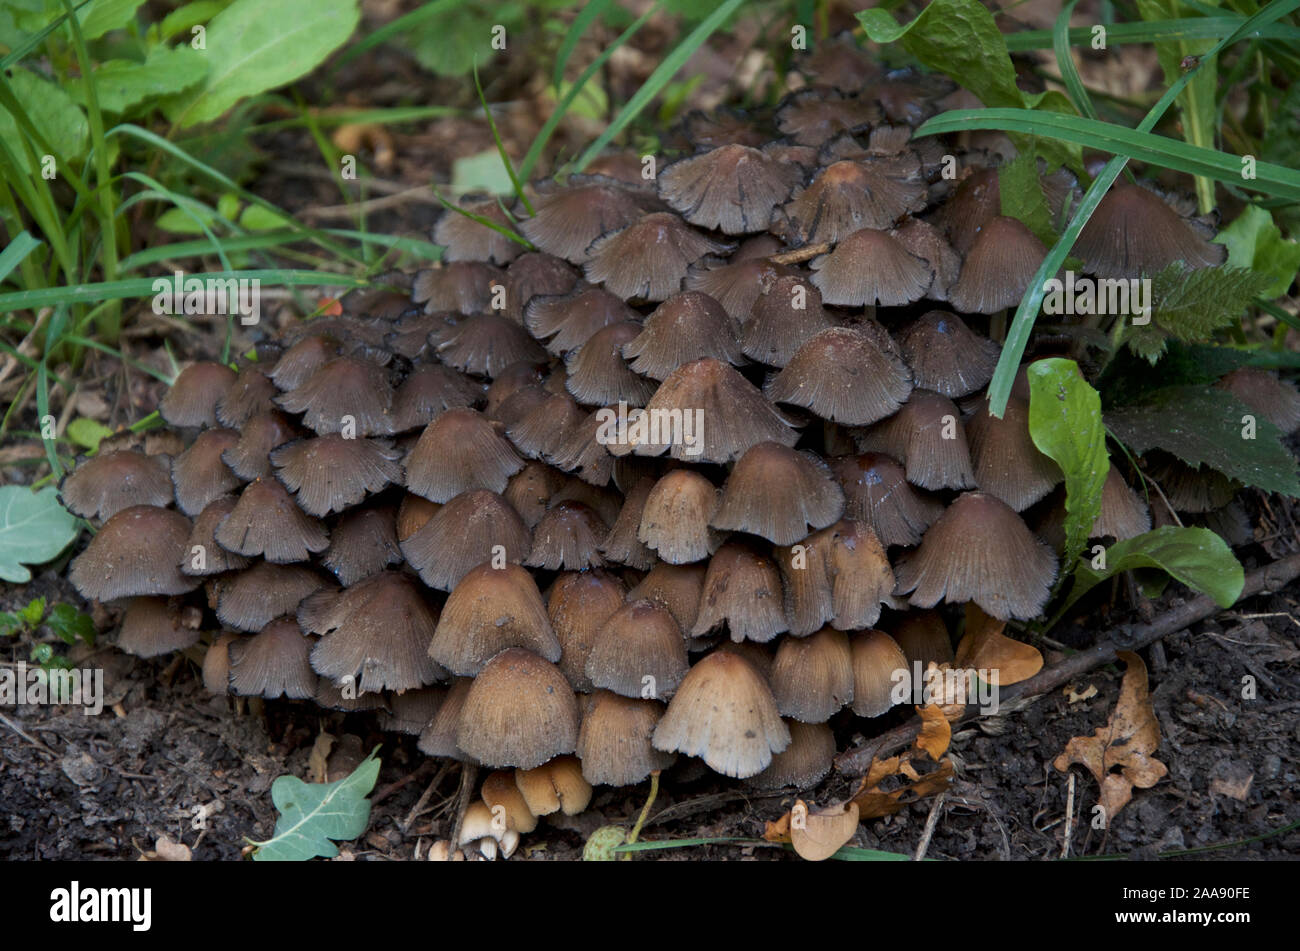 A large clump of mature Coprinopsis atramentaria fungus, common ink caps, growing on the woodland floor. Stock Photo